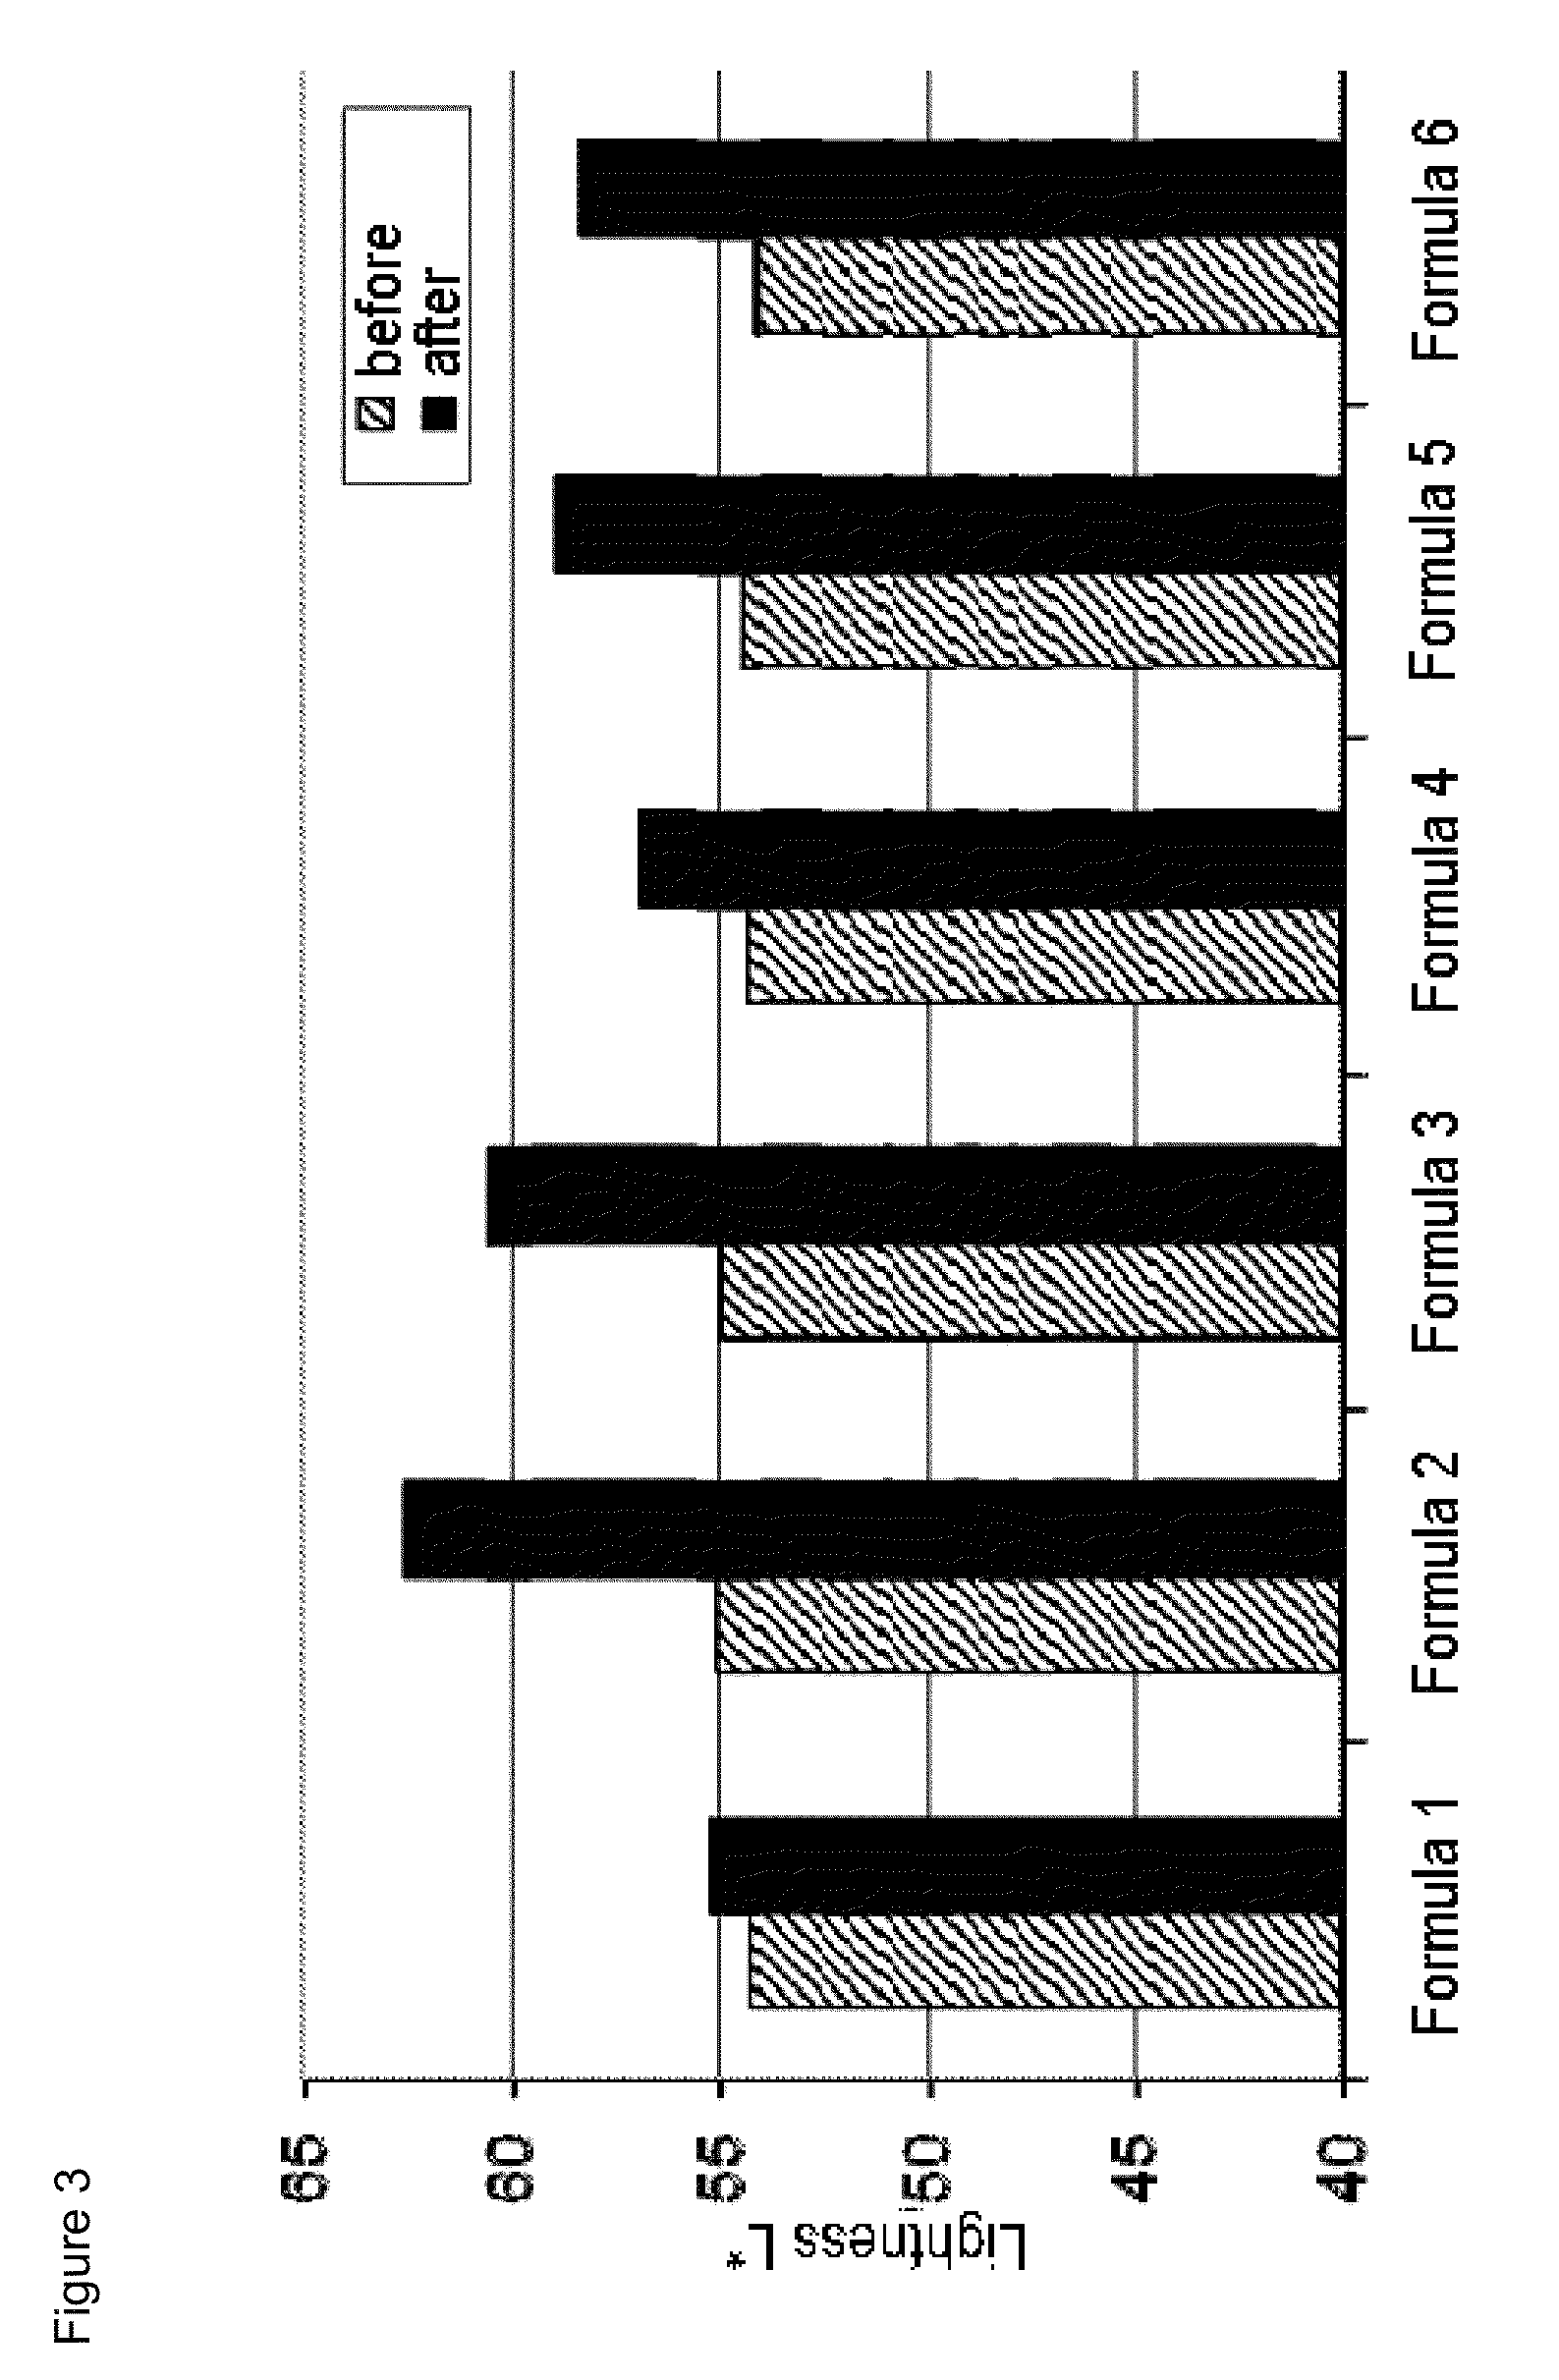 Functionalized particles and use thereof